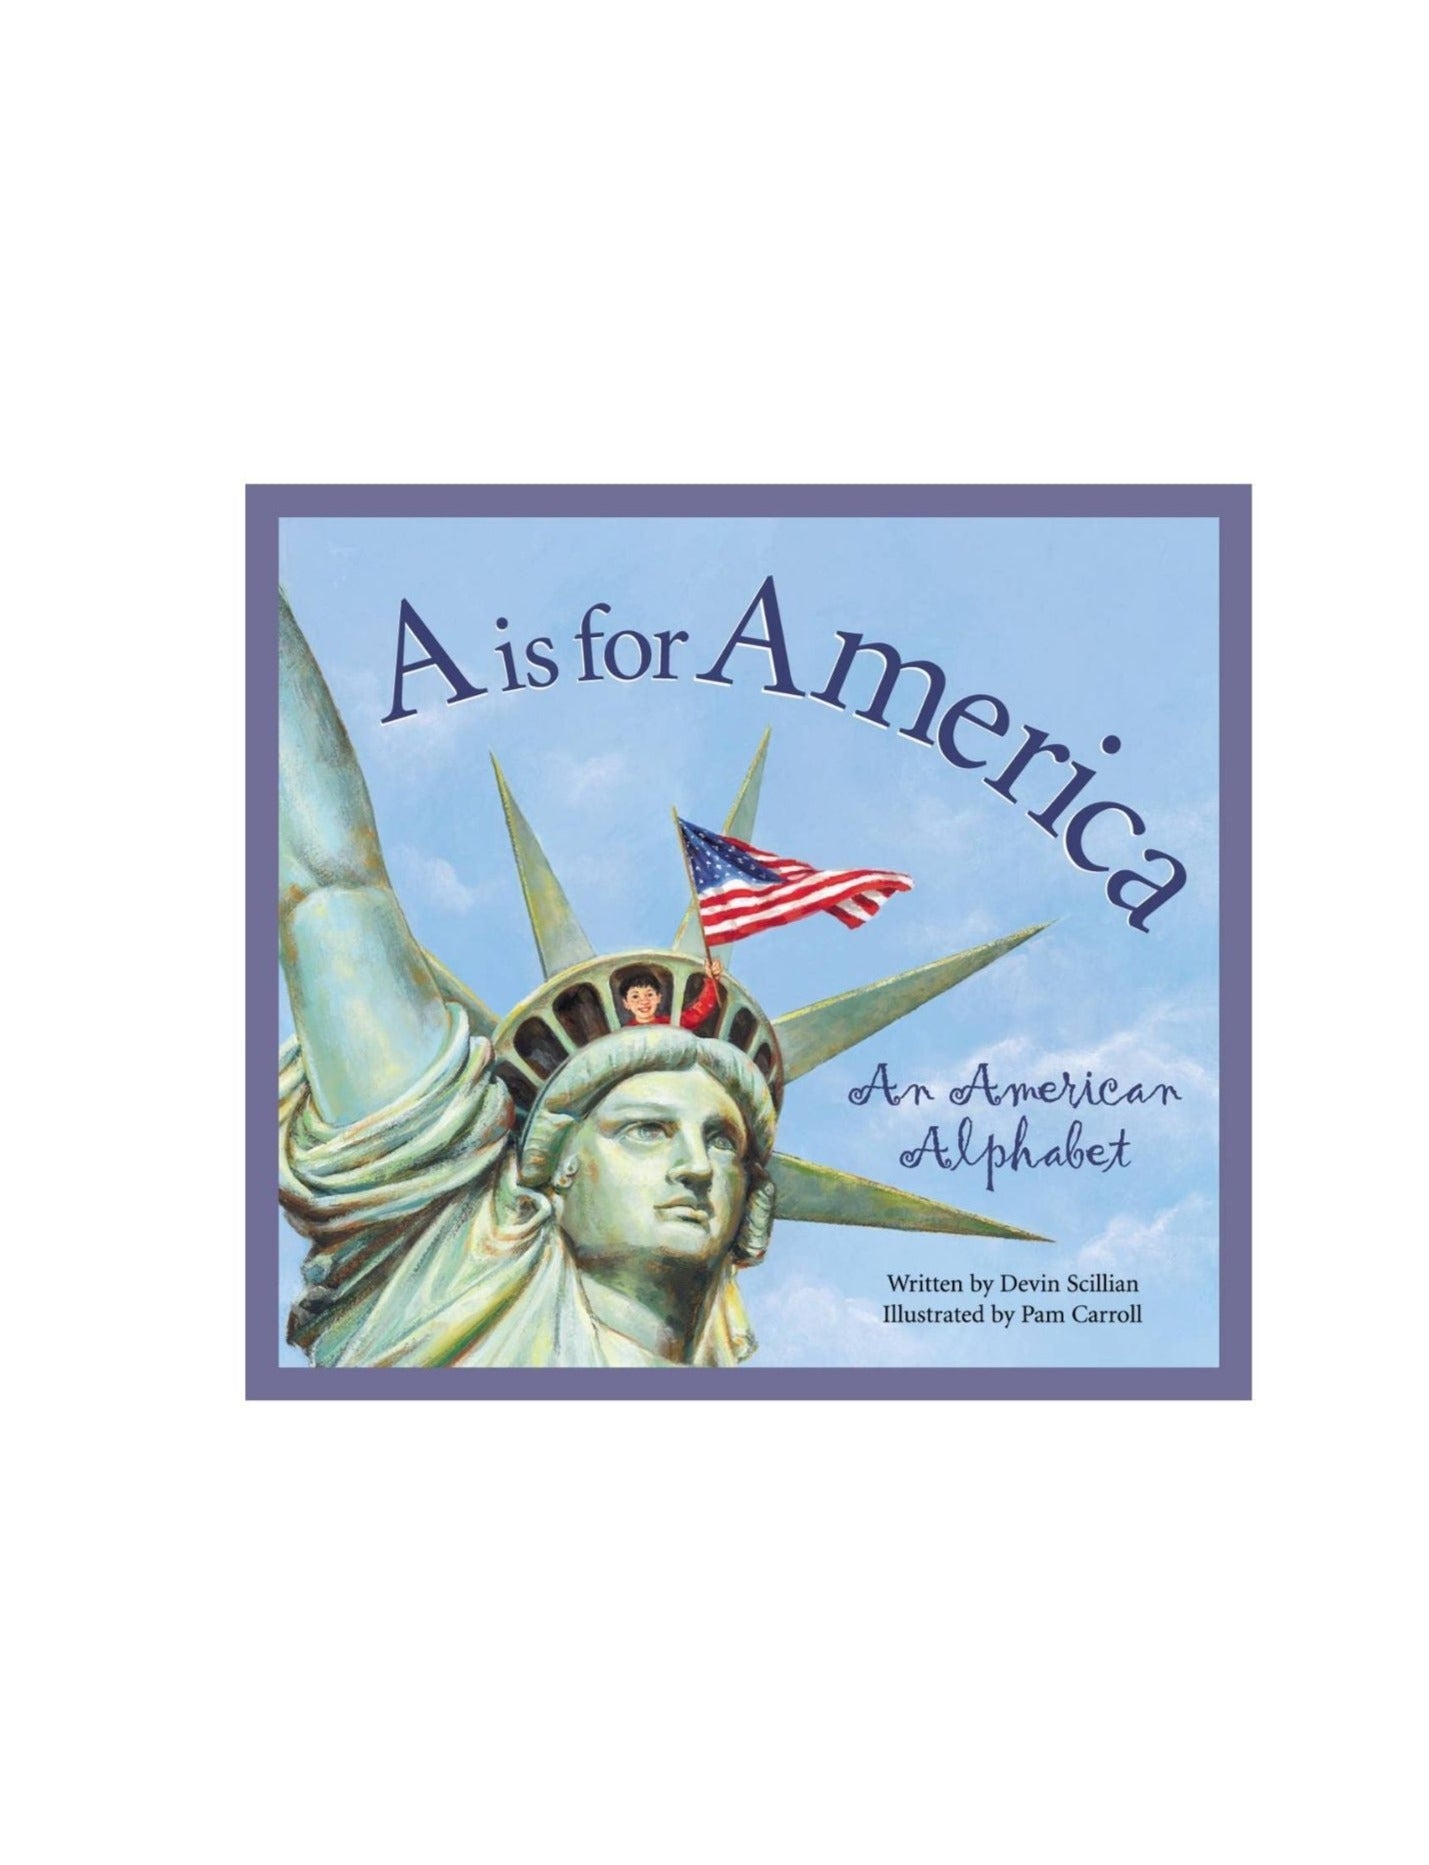 book cover with the statue of liberty and kid holding a flag - Sleeping Bear Press